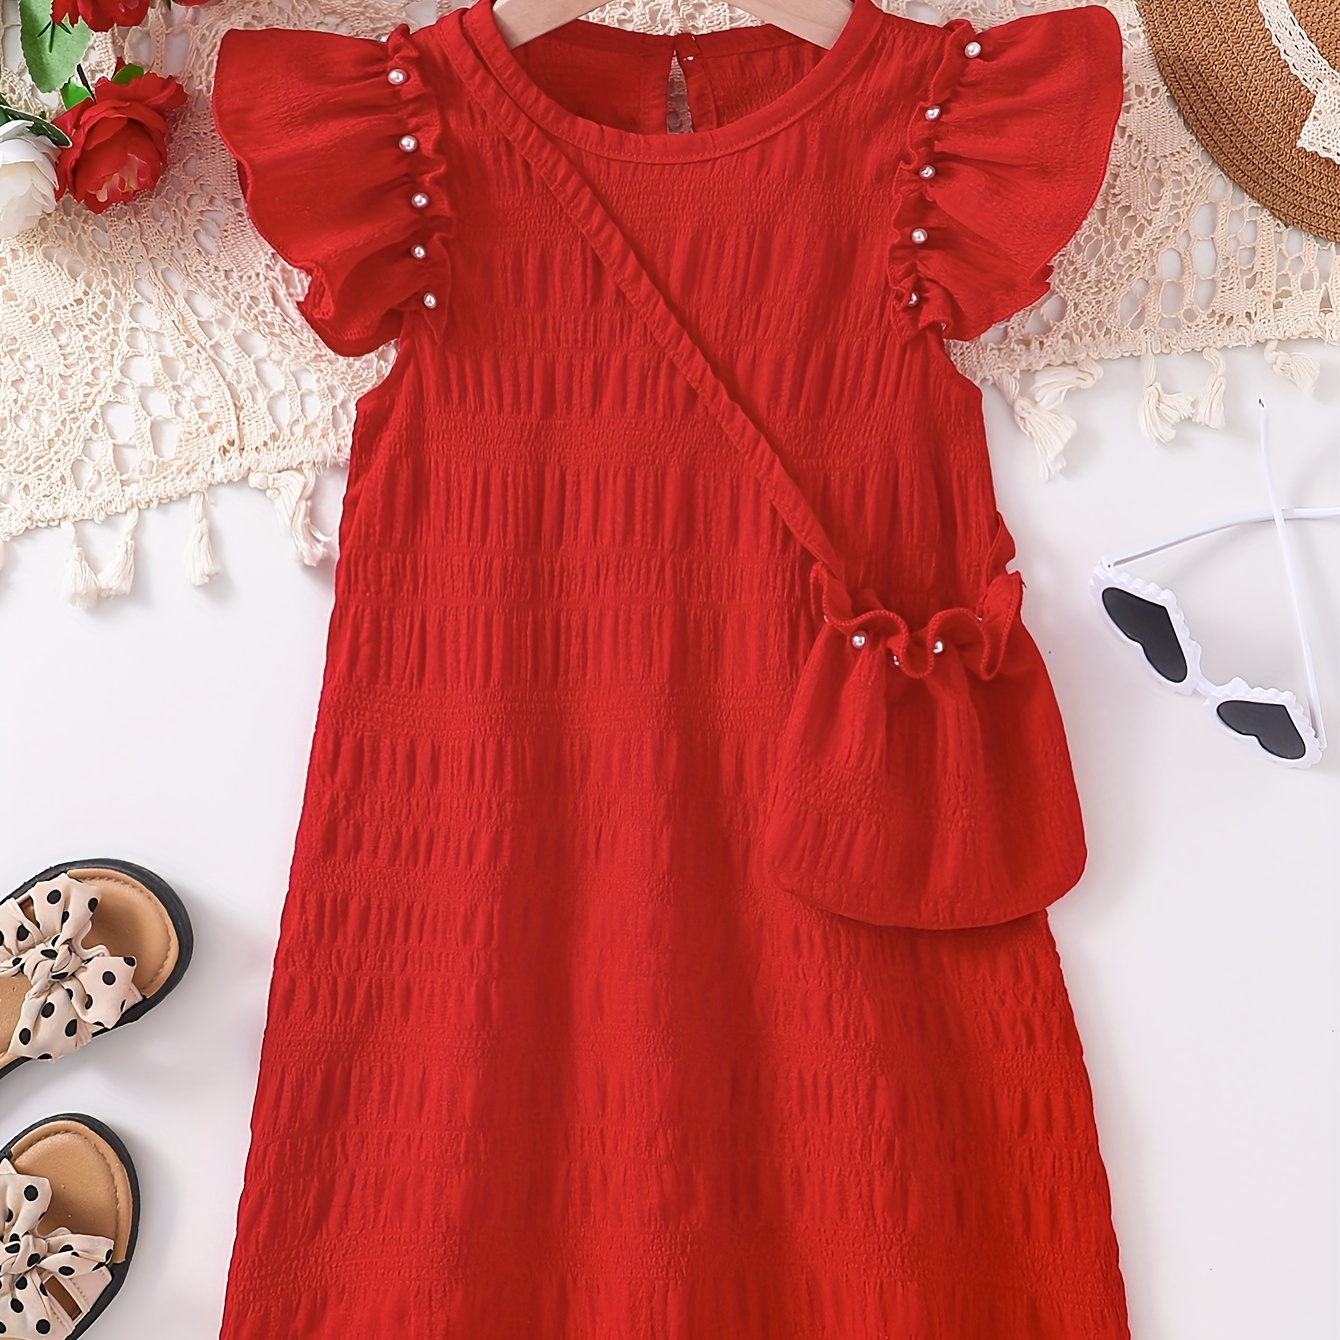 

Elegant Girls Solid Ruffle Trim Crew Neck Dress With Bag For Summer Valentine's Day Gift